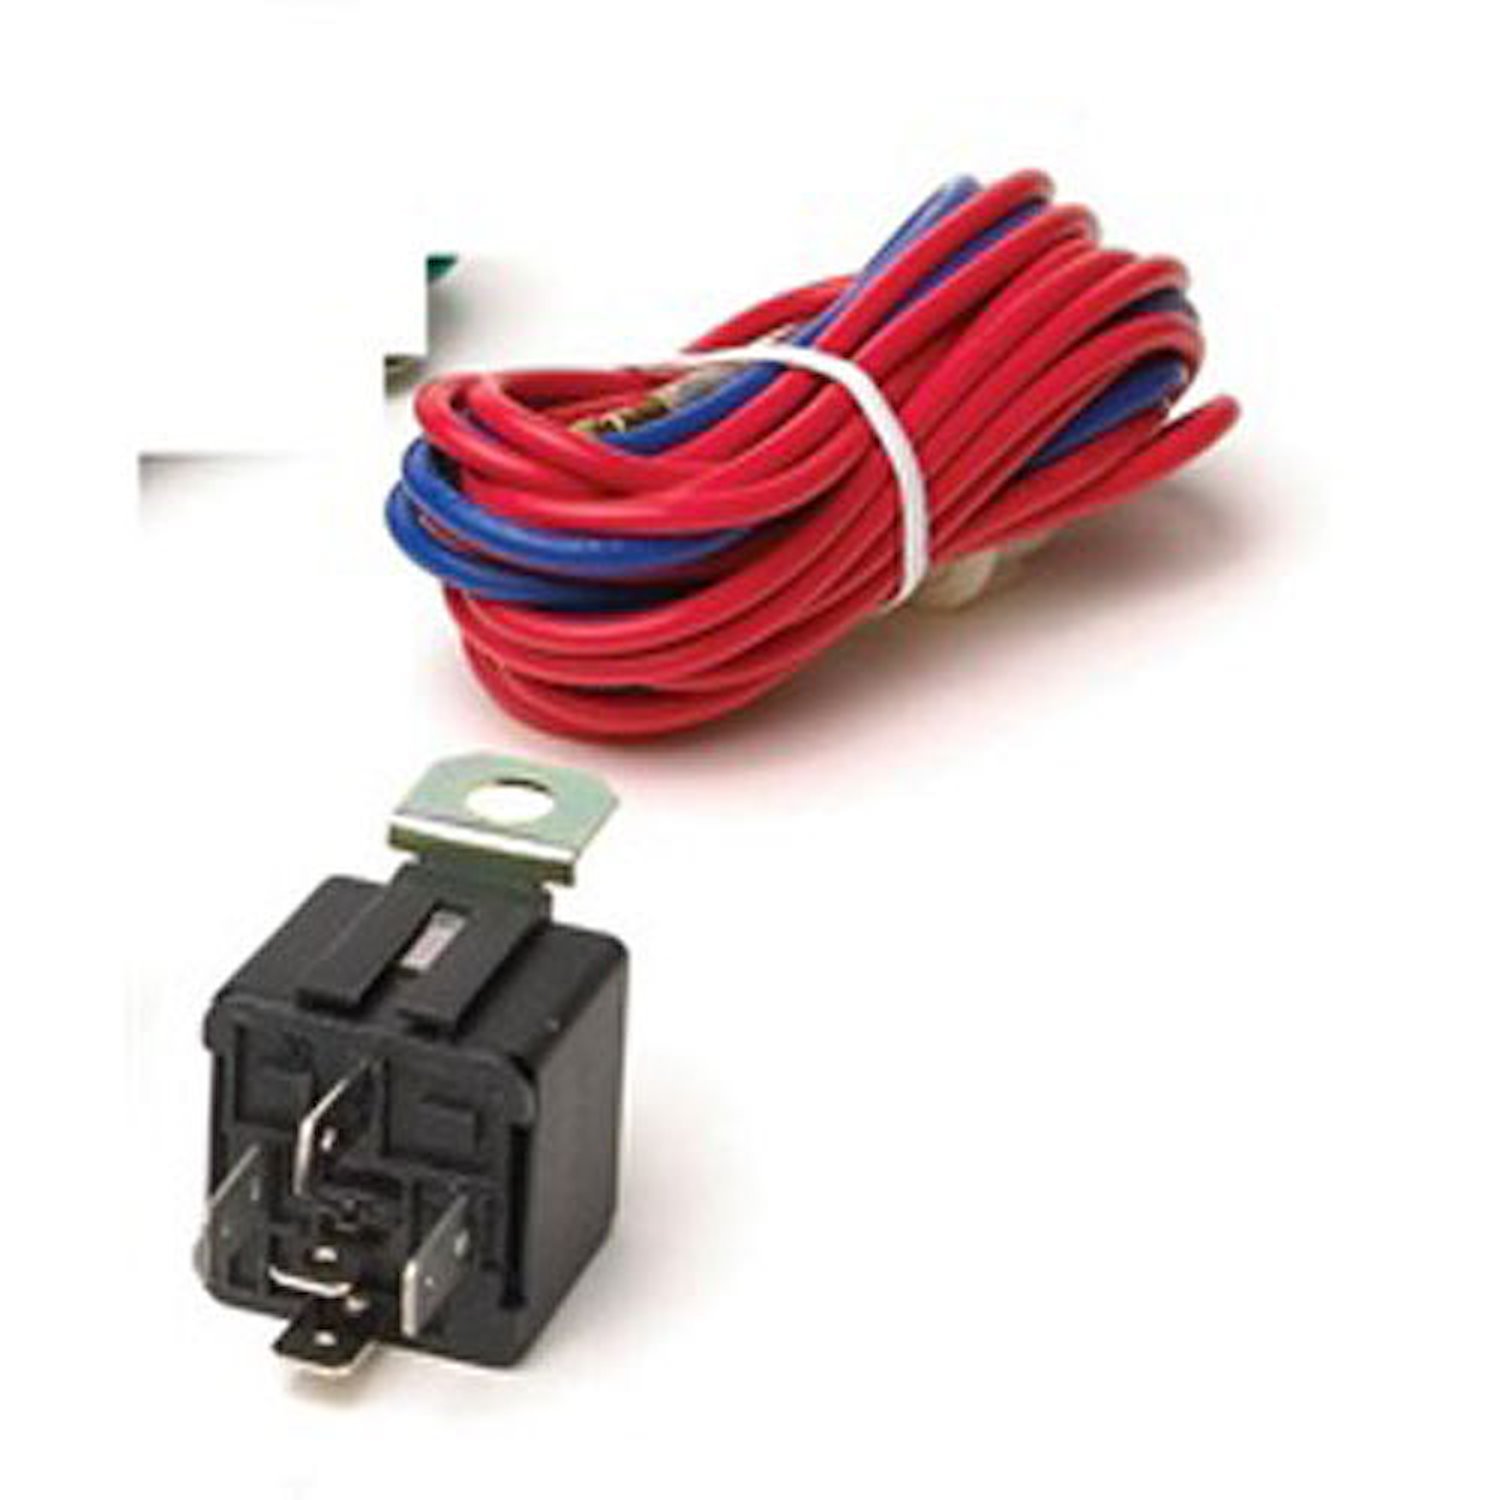 Wiring Harness Kit Includes 40 AMP Relay Fuse